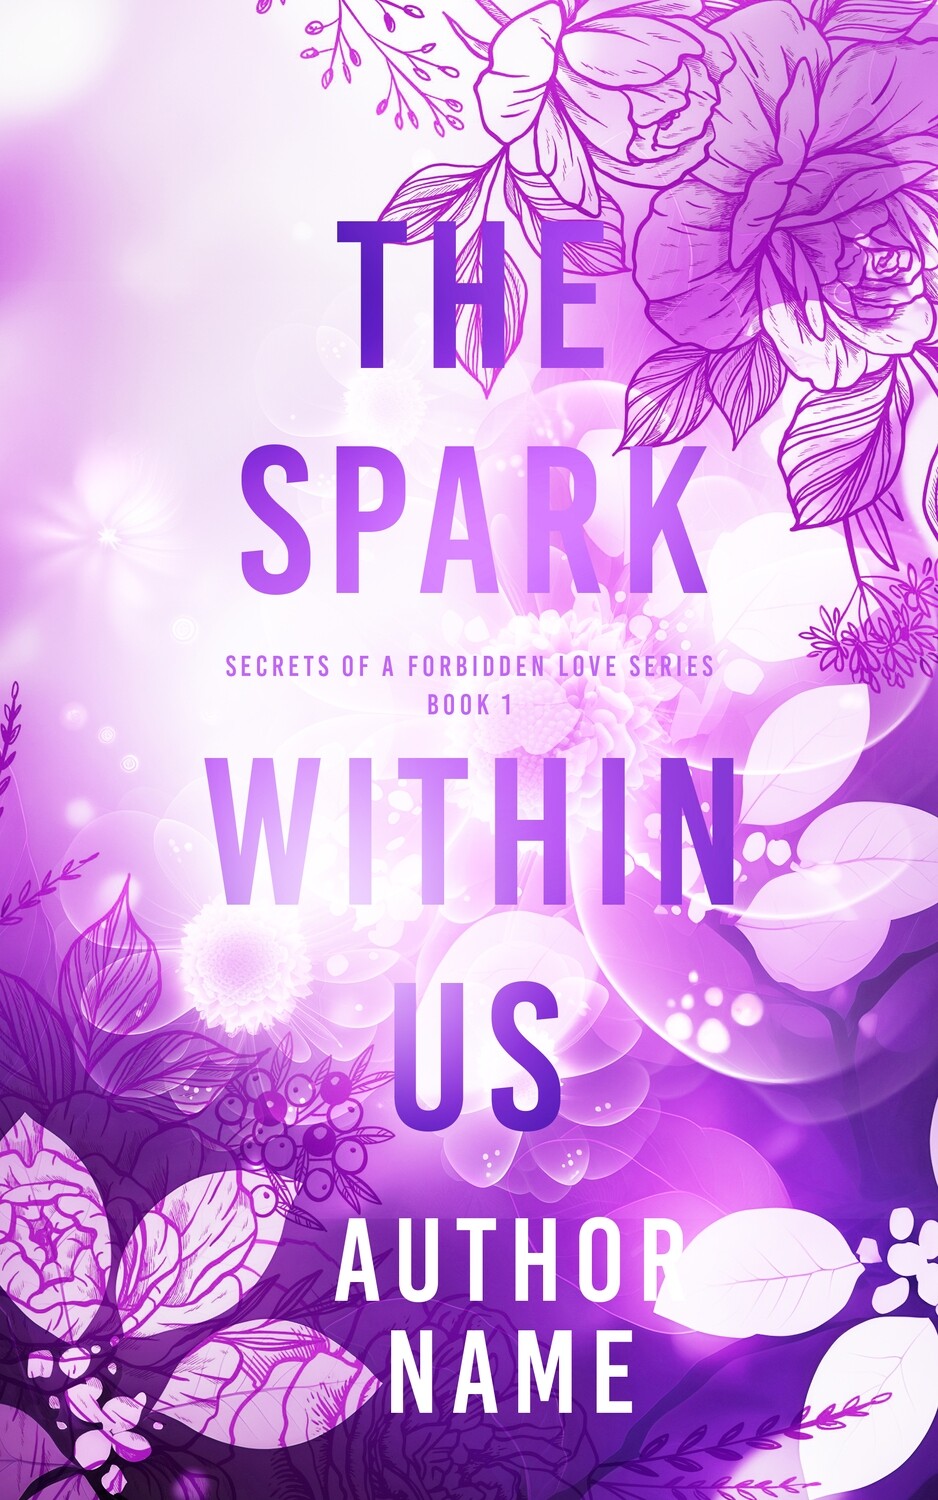 THE SPARK WITHIN US